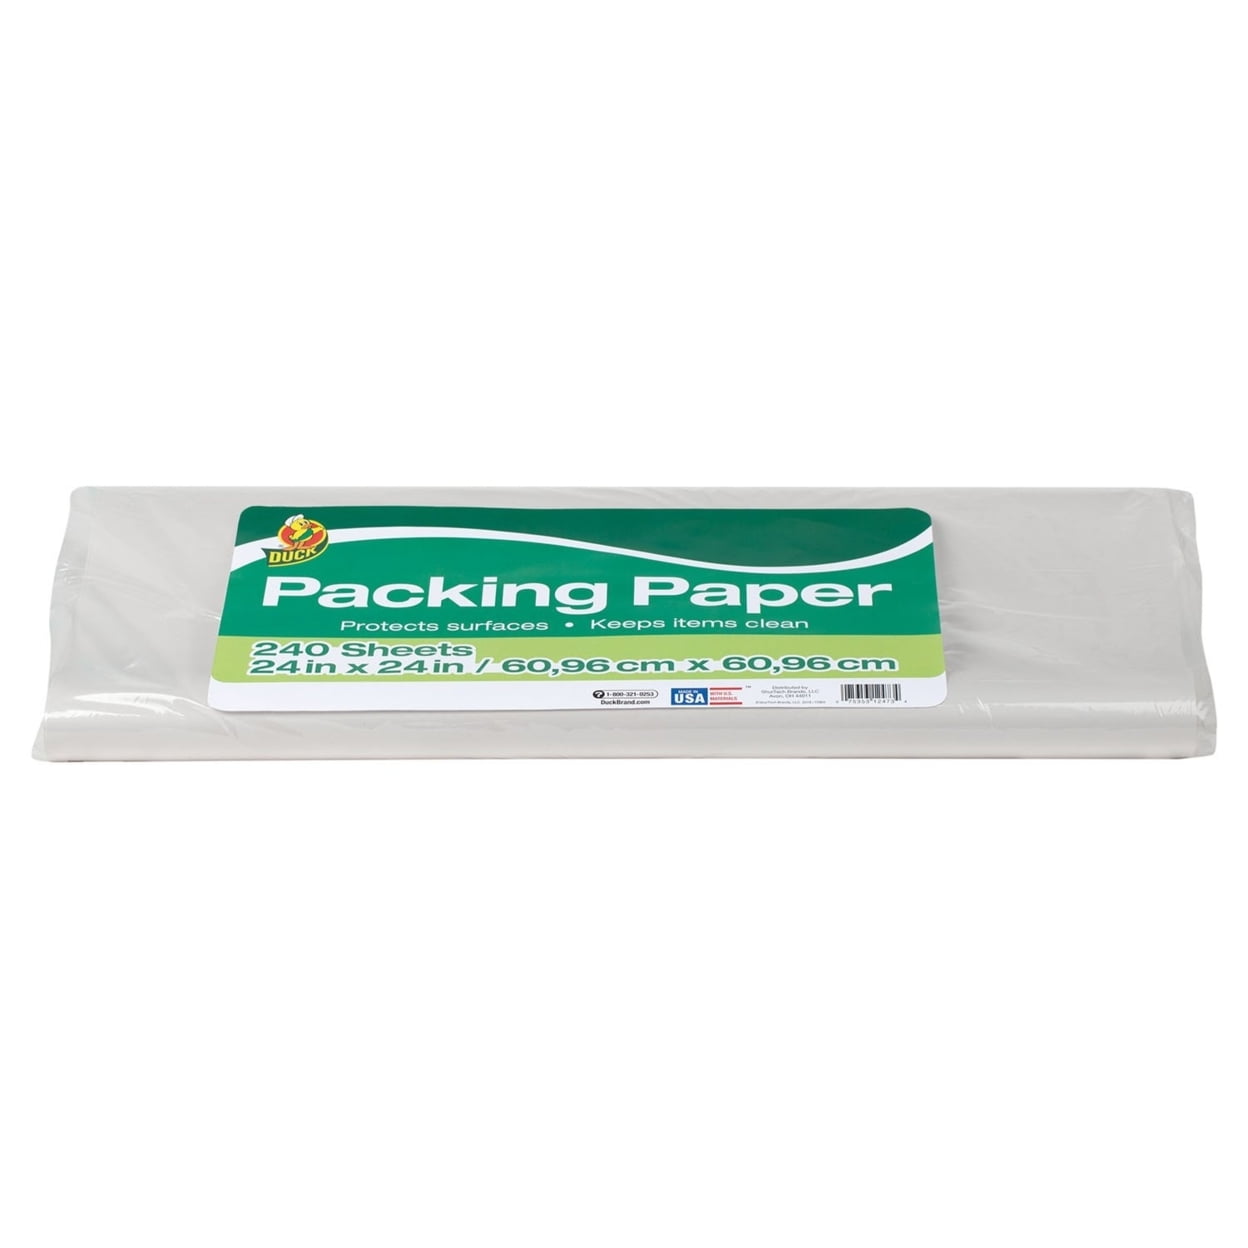 Duck Brand Packing Paper, White, 24 x 24 (240 Sheets) 